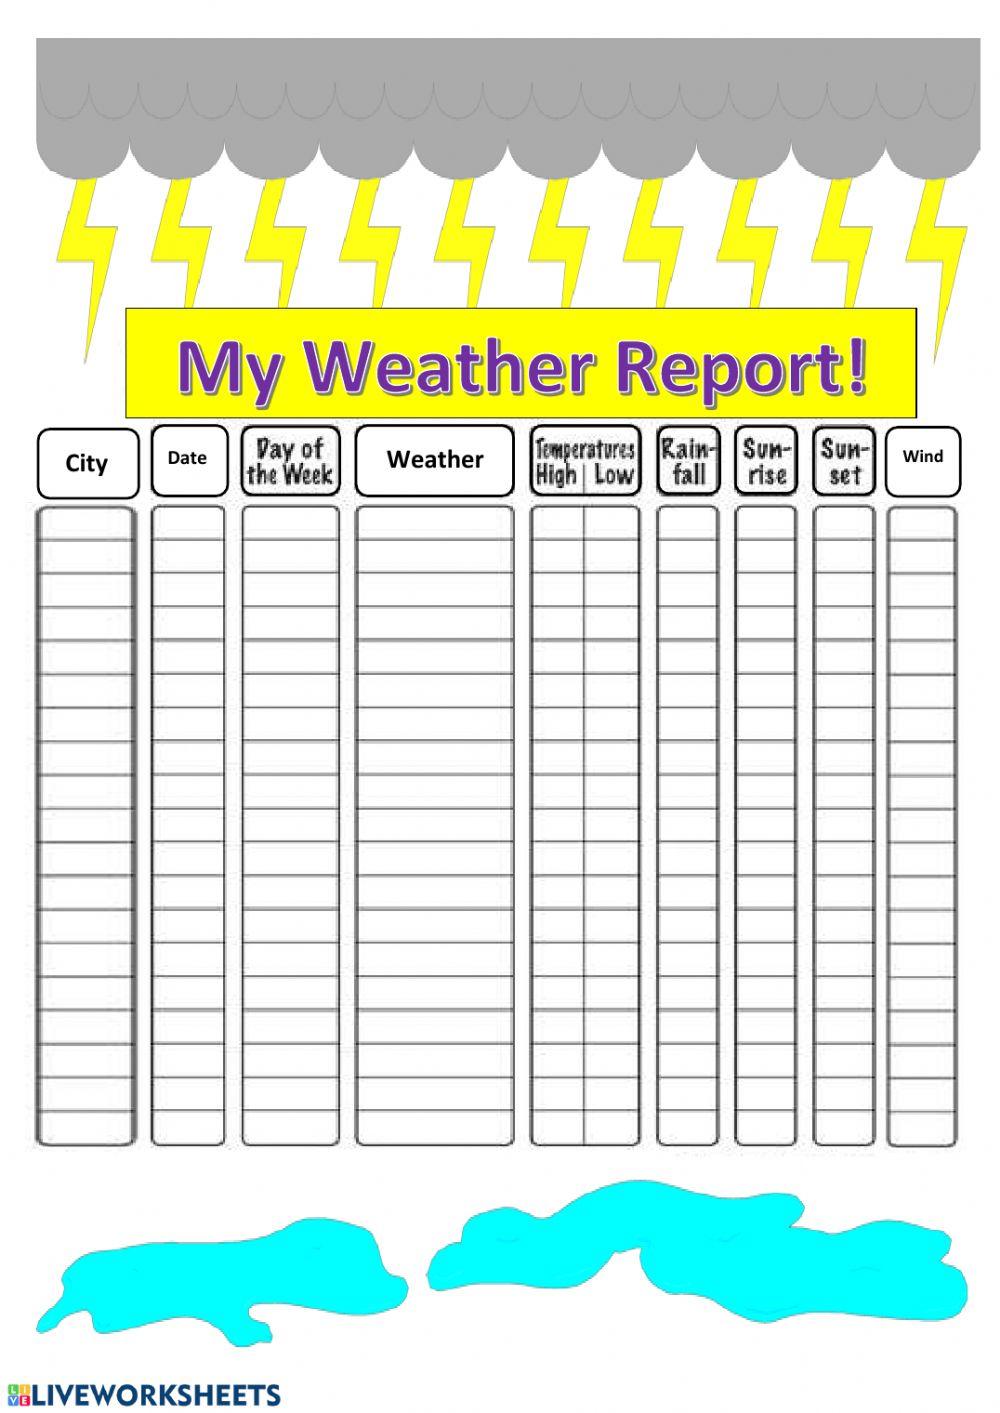 My weather report